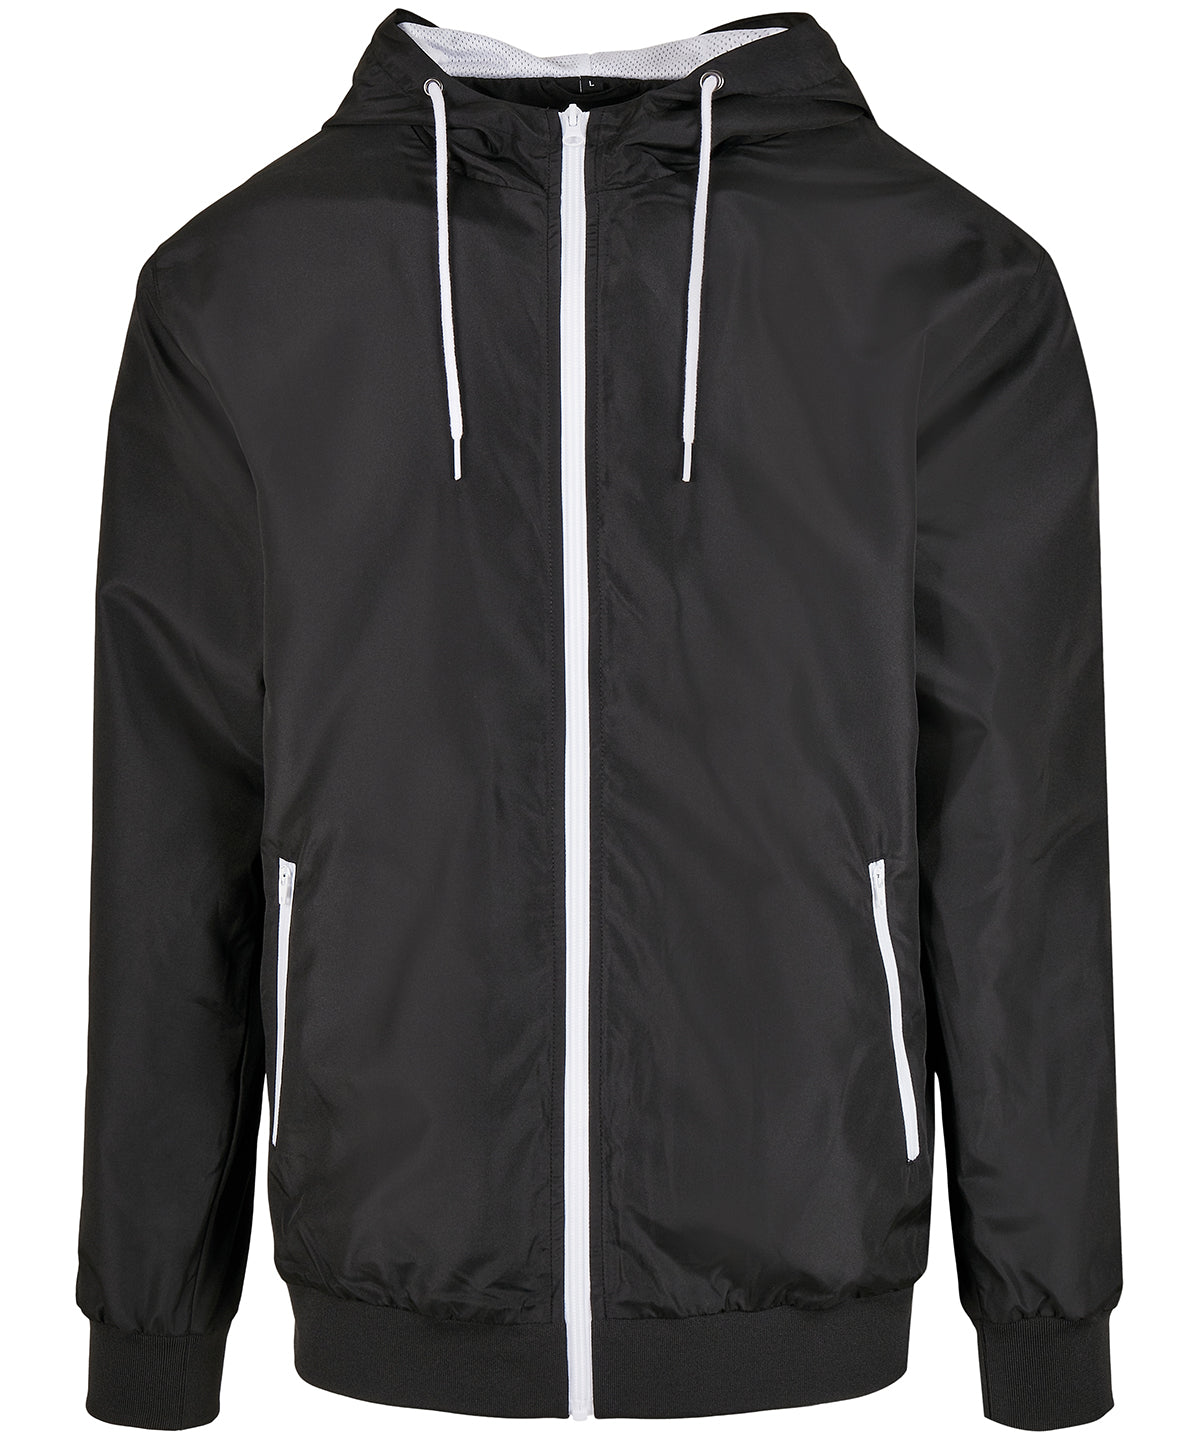 Personalised Jackets - Black Build Your Brand Recycled windrunner